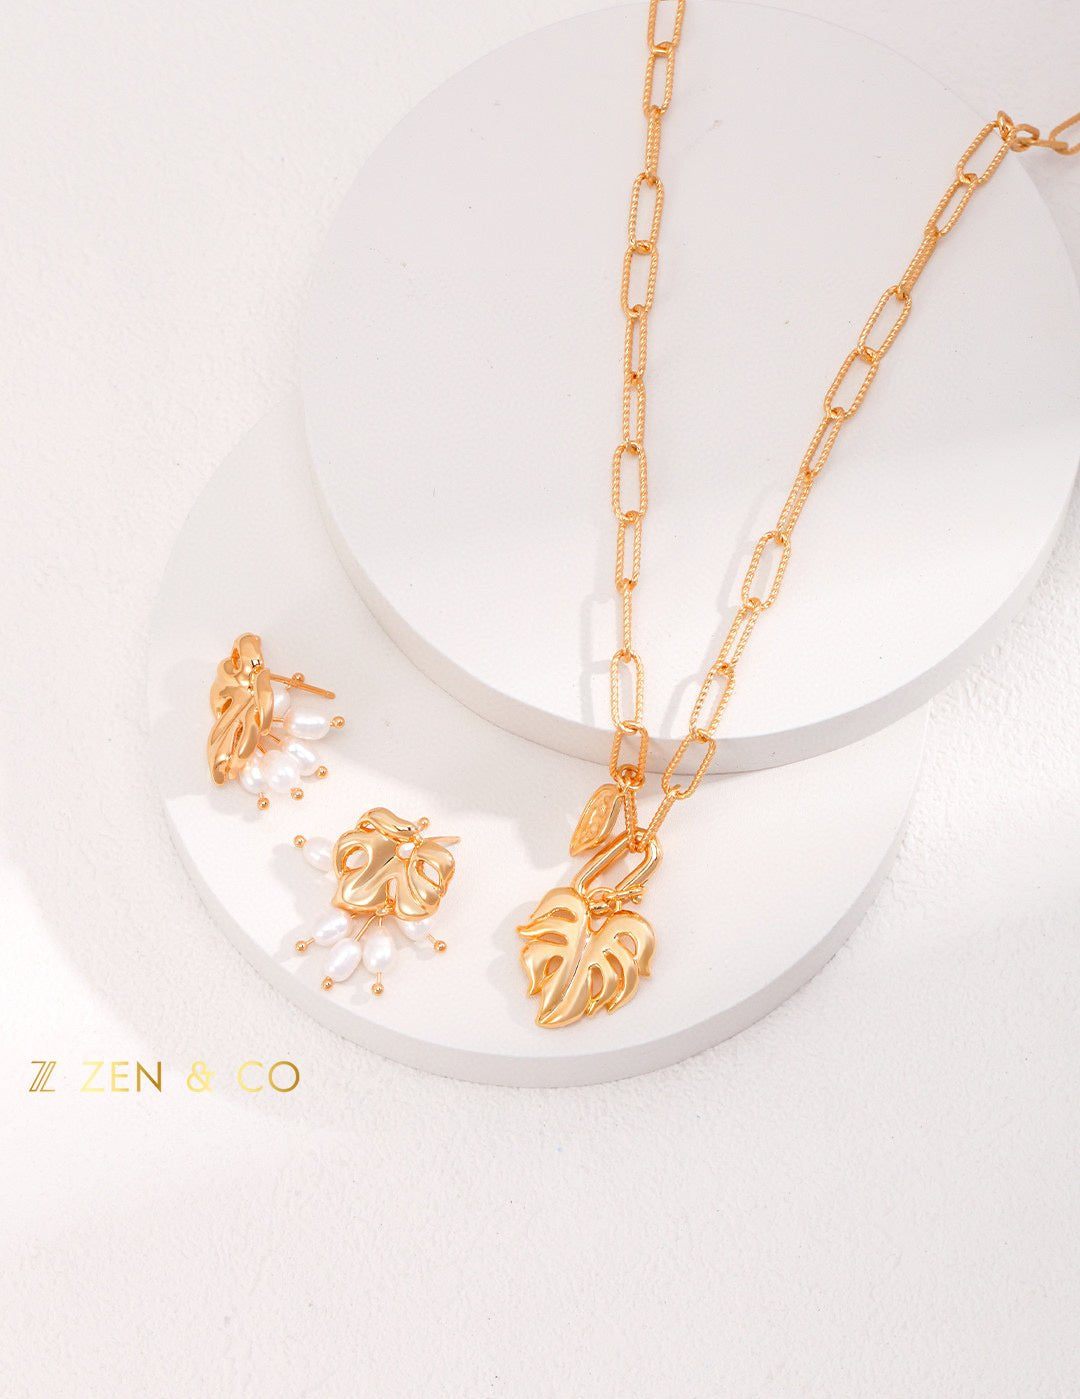 LUCY GRAY Gold chain necklace with leaf peadant - ZEN&CO Studio